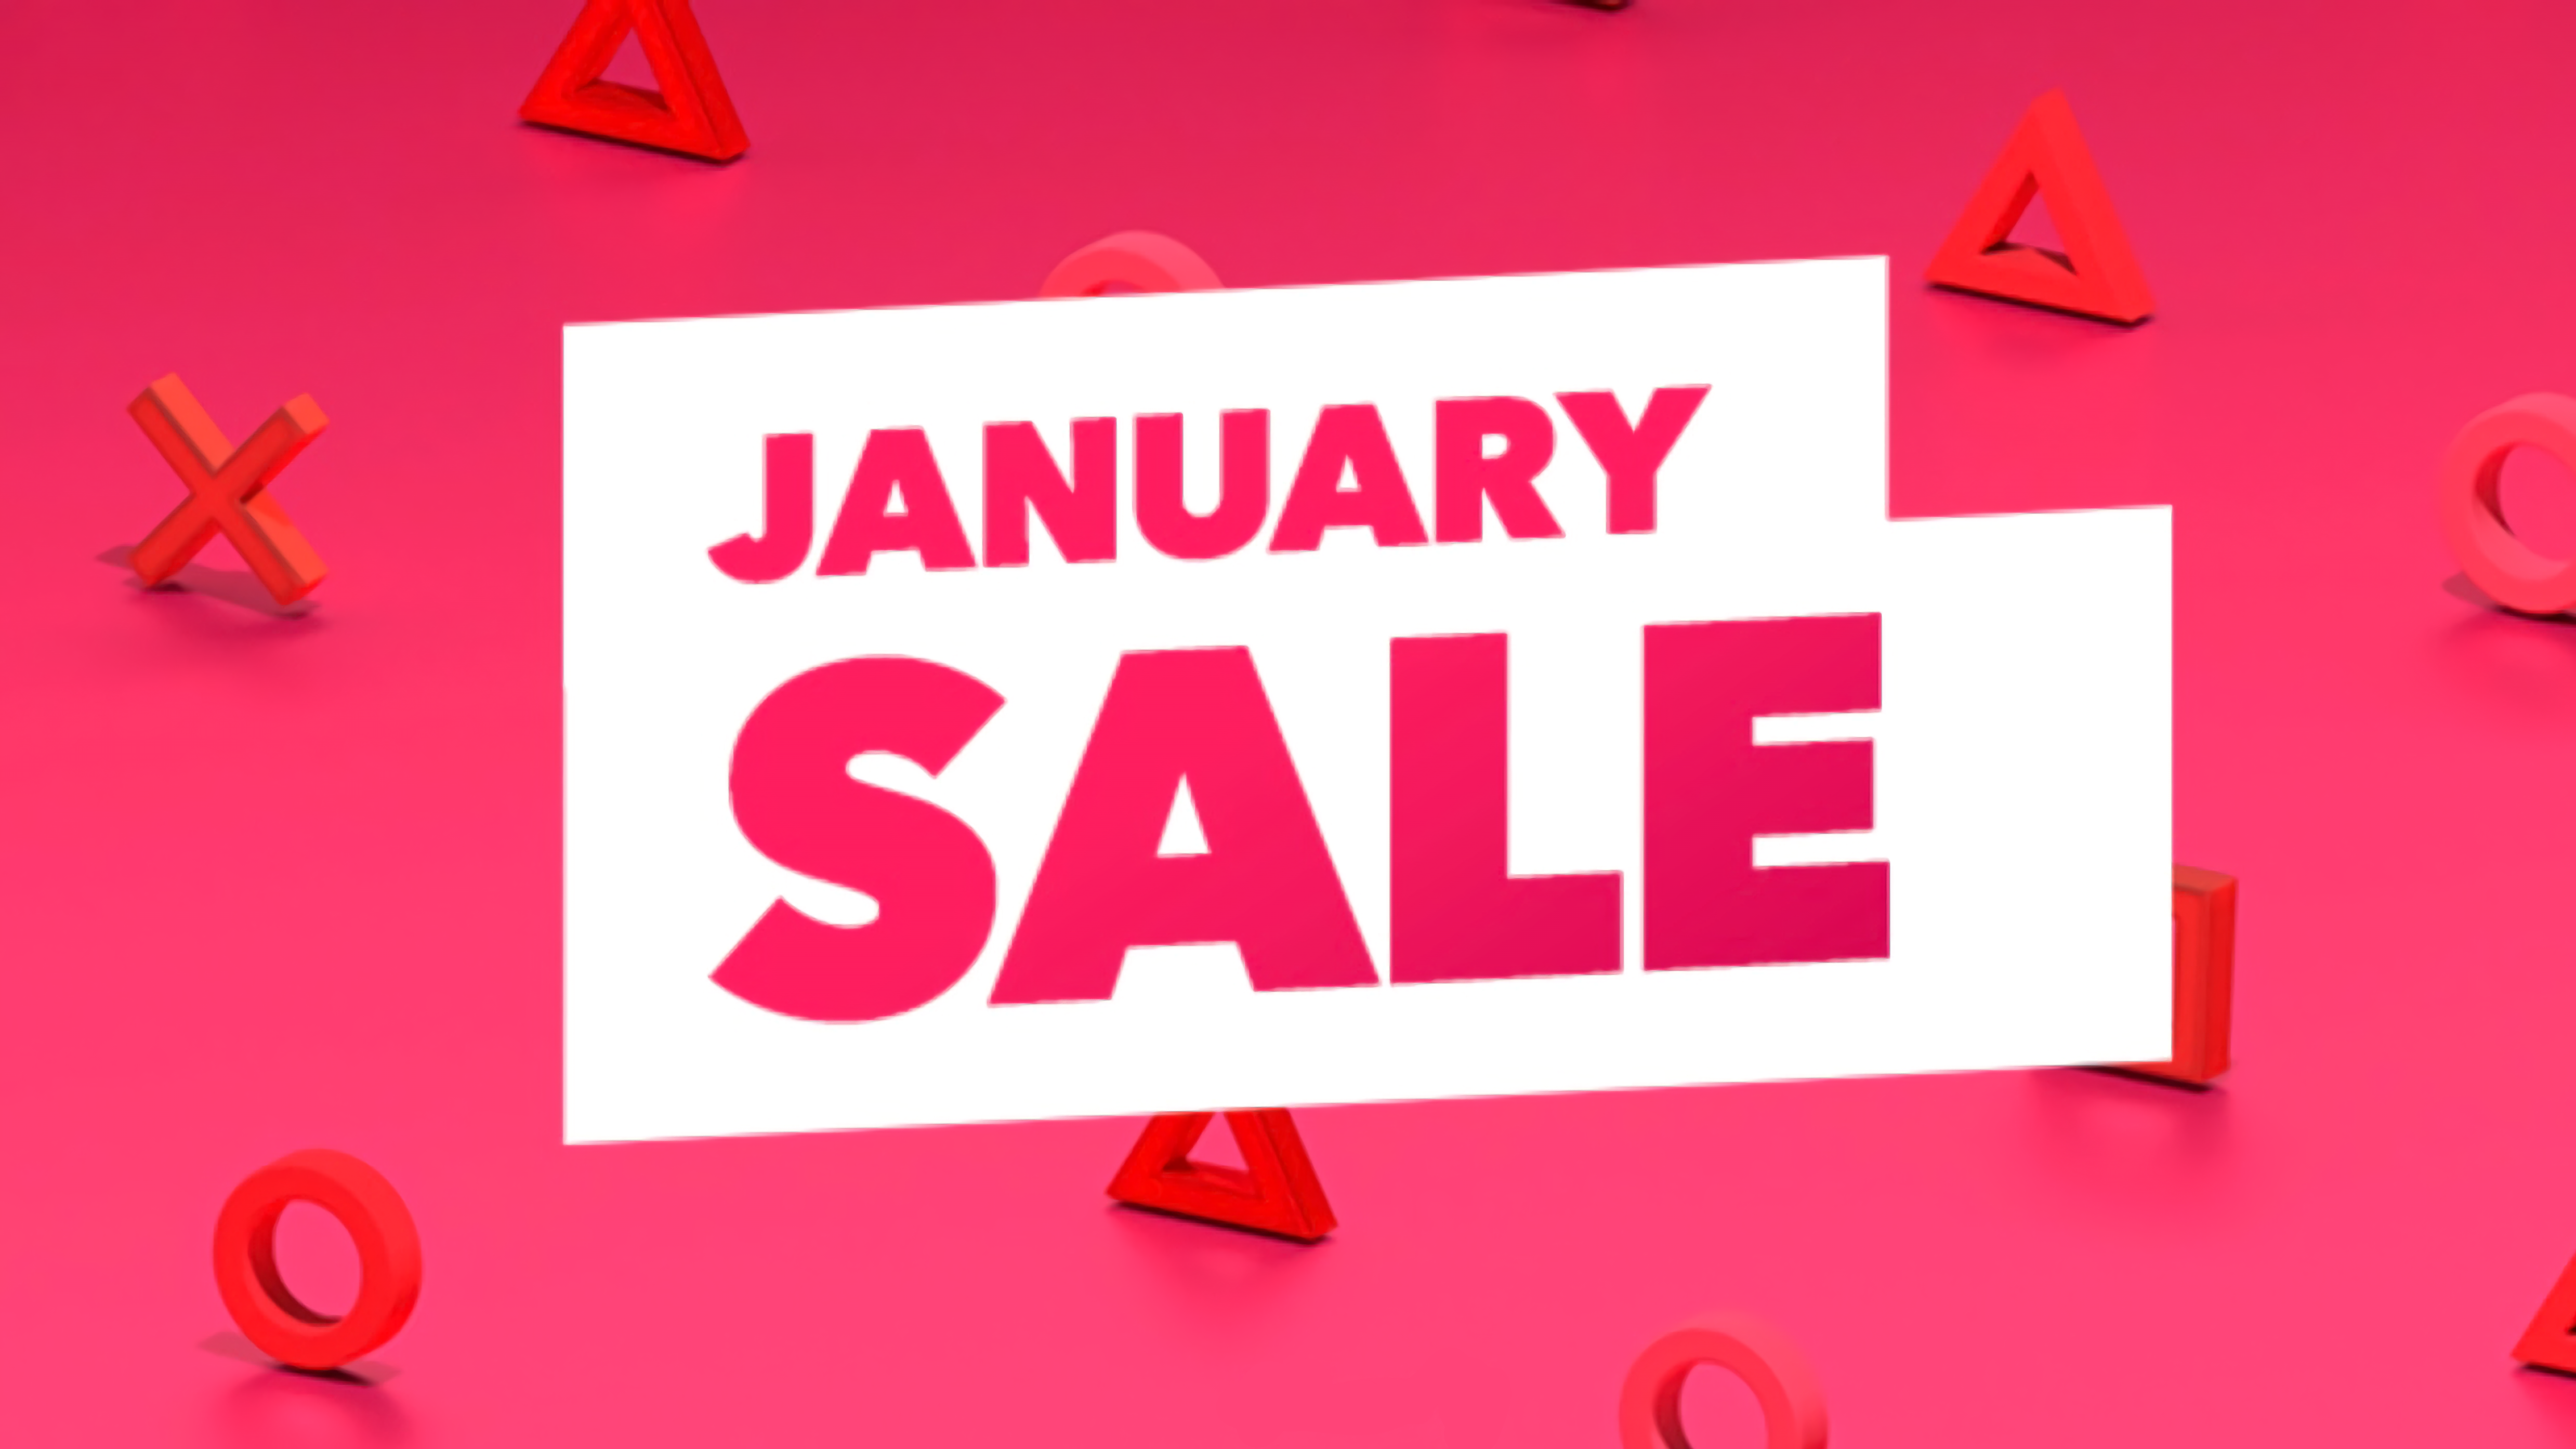 PLAYSTATION Summer sale. The january sales started and